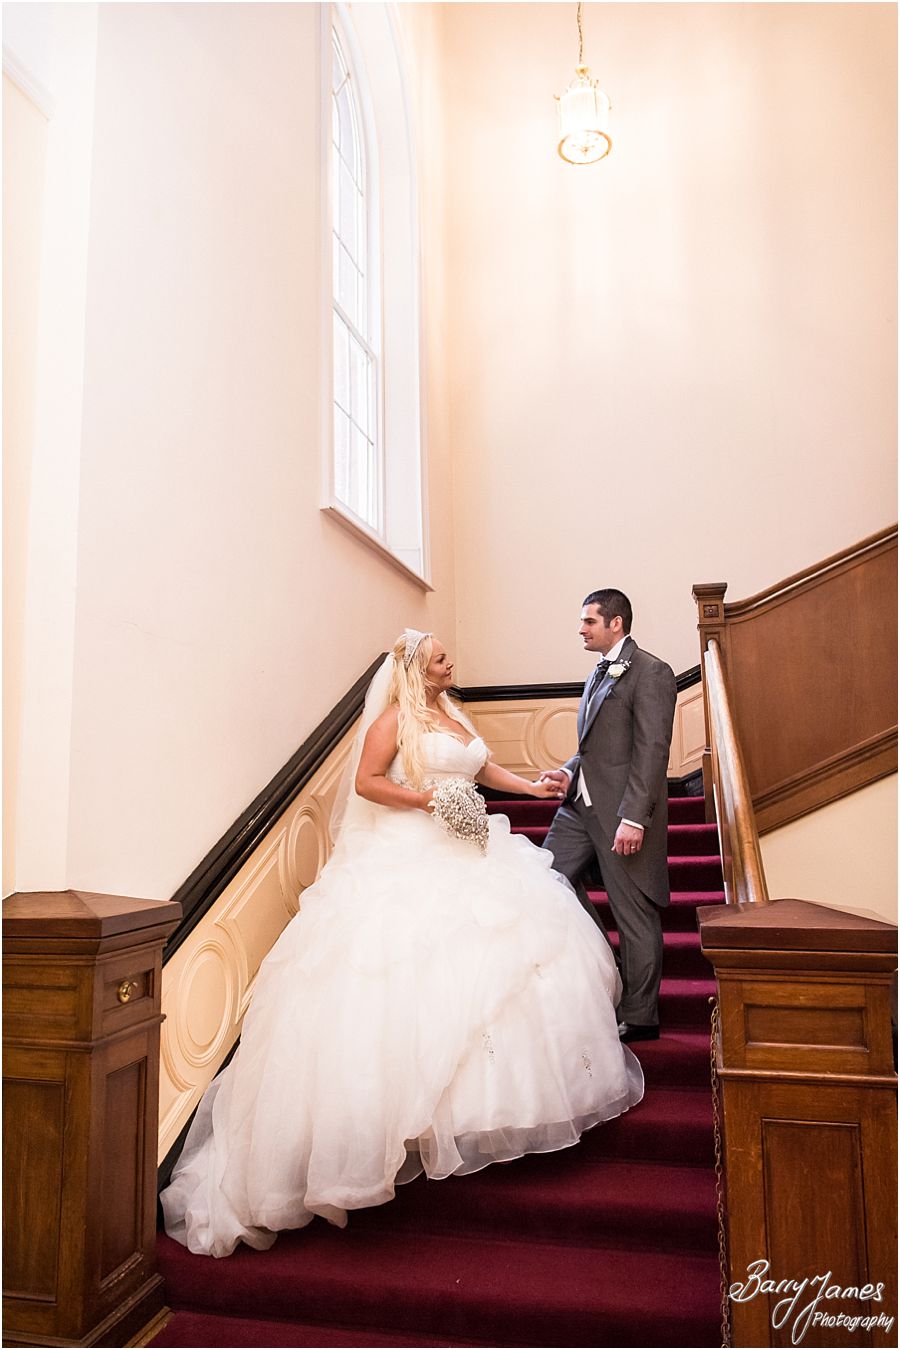 Capturing creative classical and relaxed portraits at Himley Hall in Dudley by Dudley Wedding Photographer Barry James